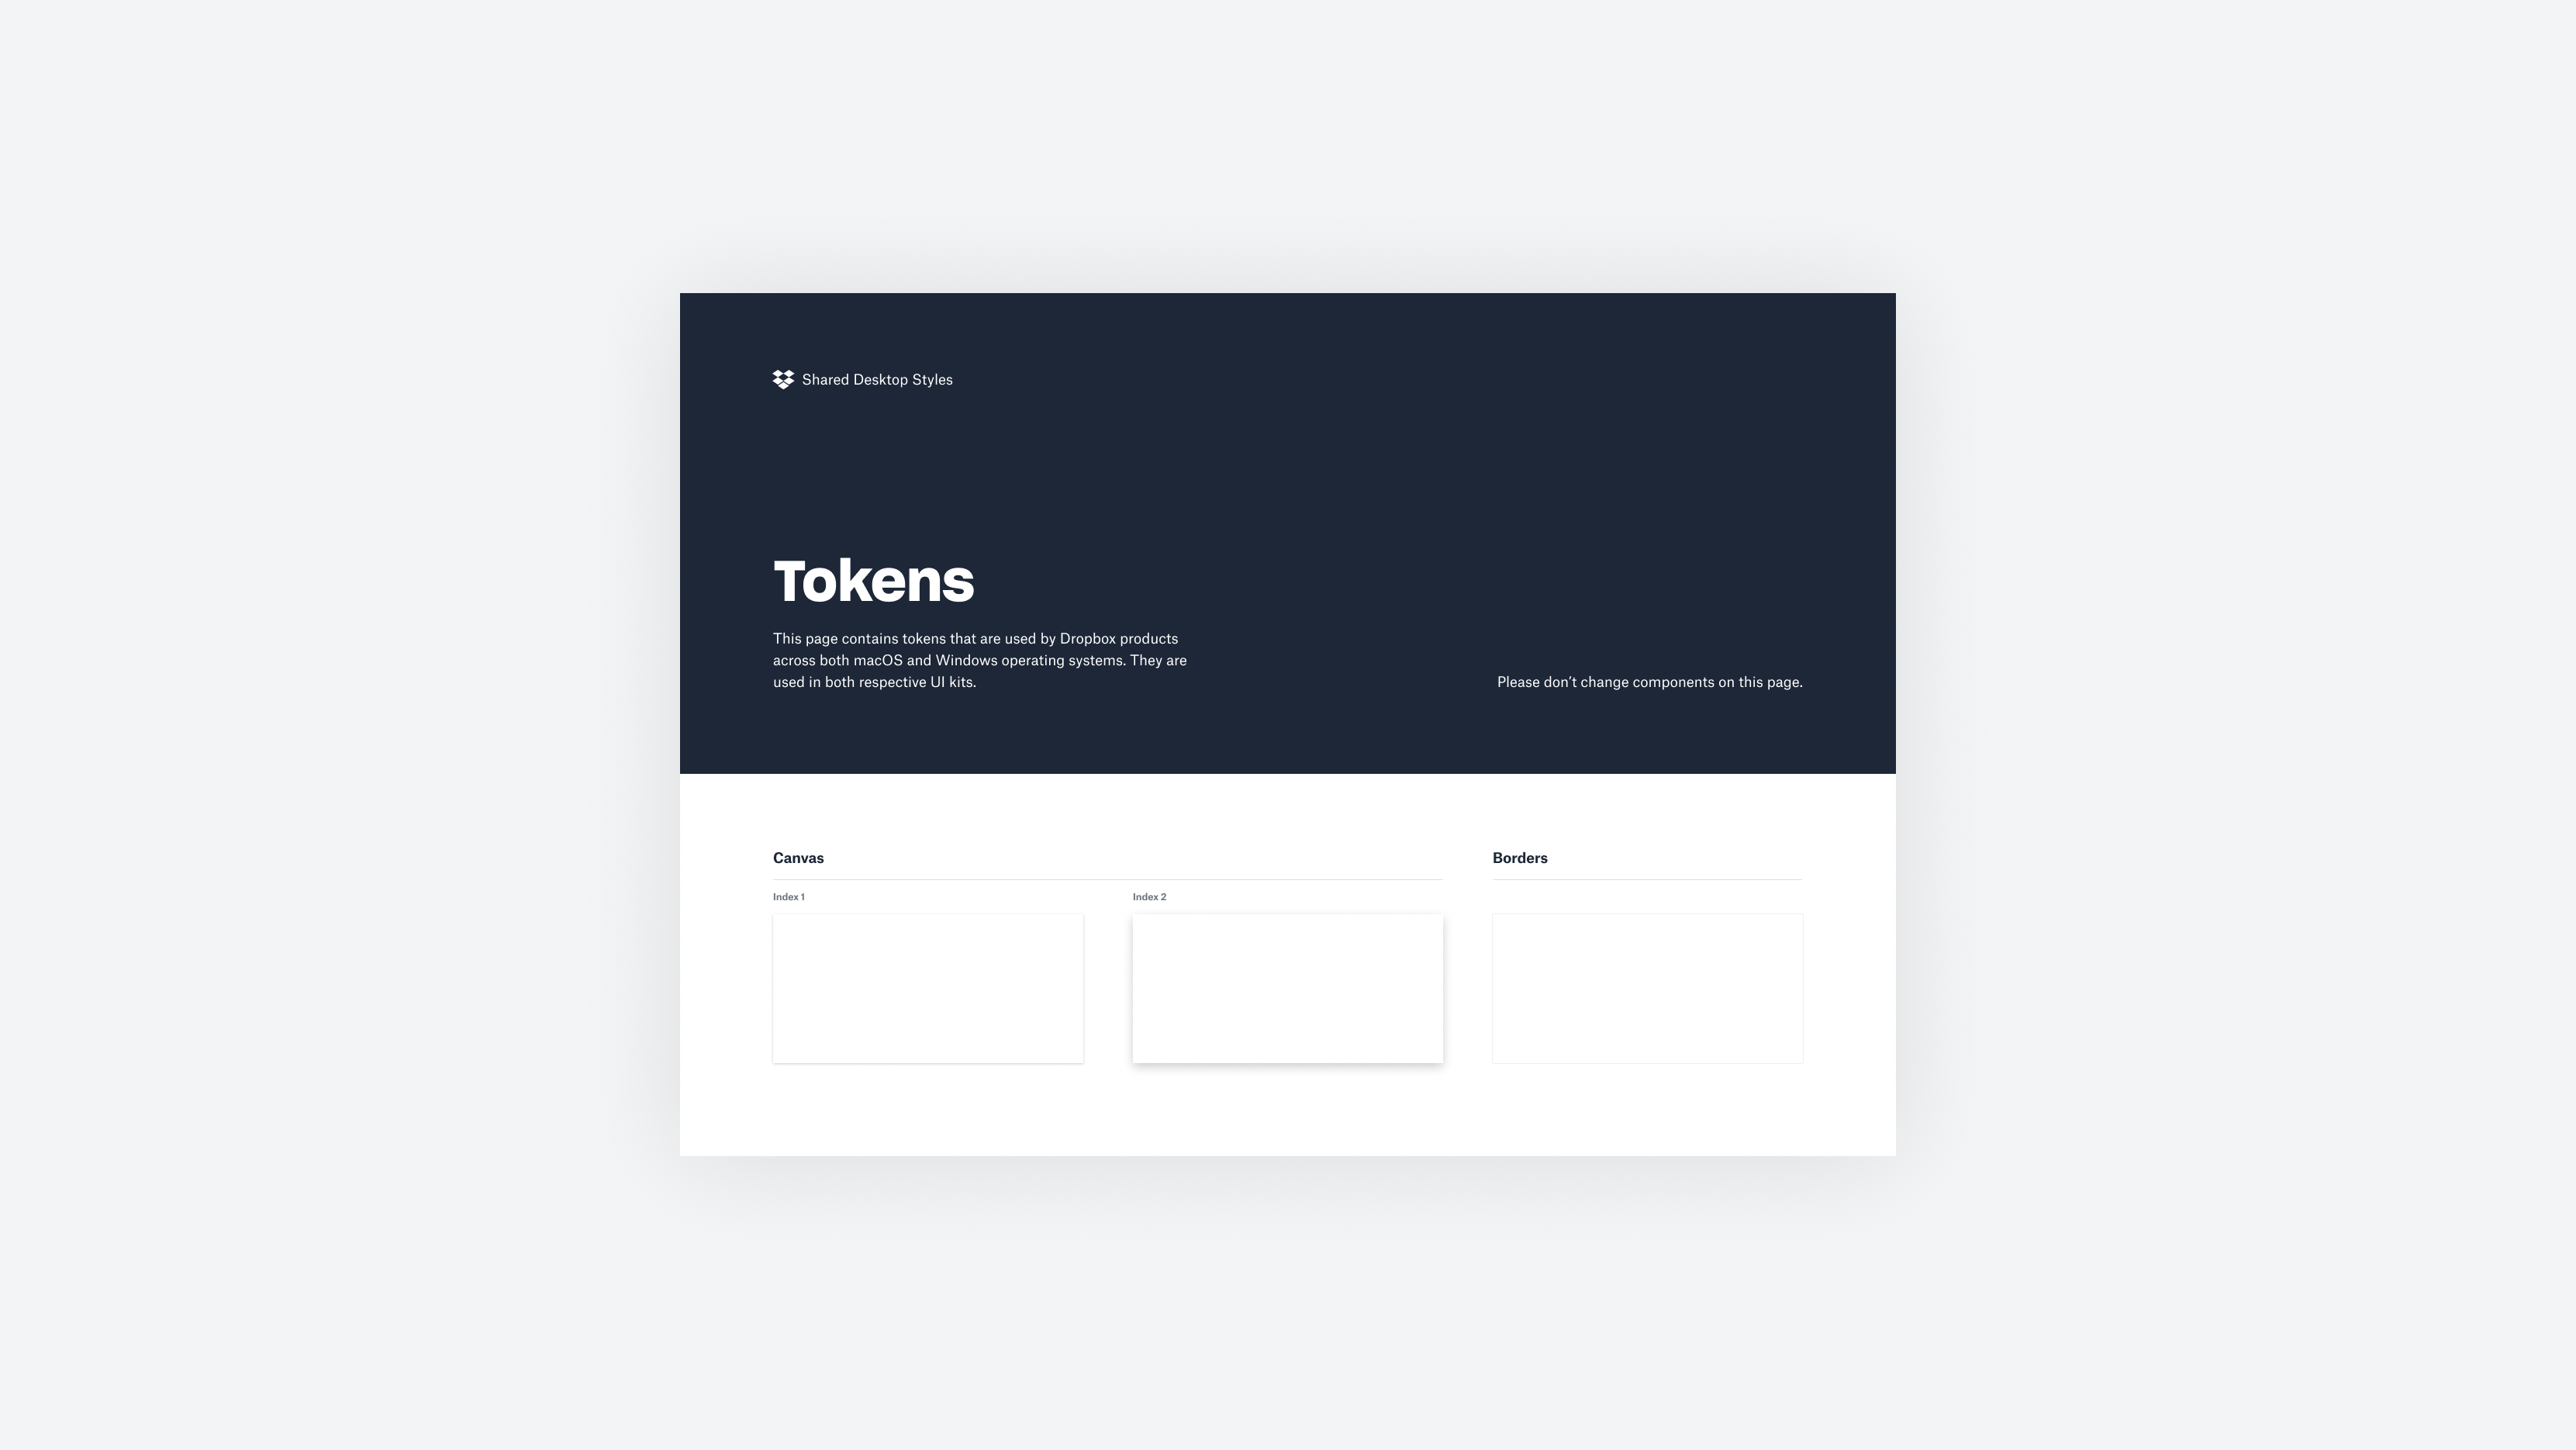 Tokens from Shared Desktop Styles.